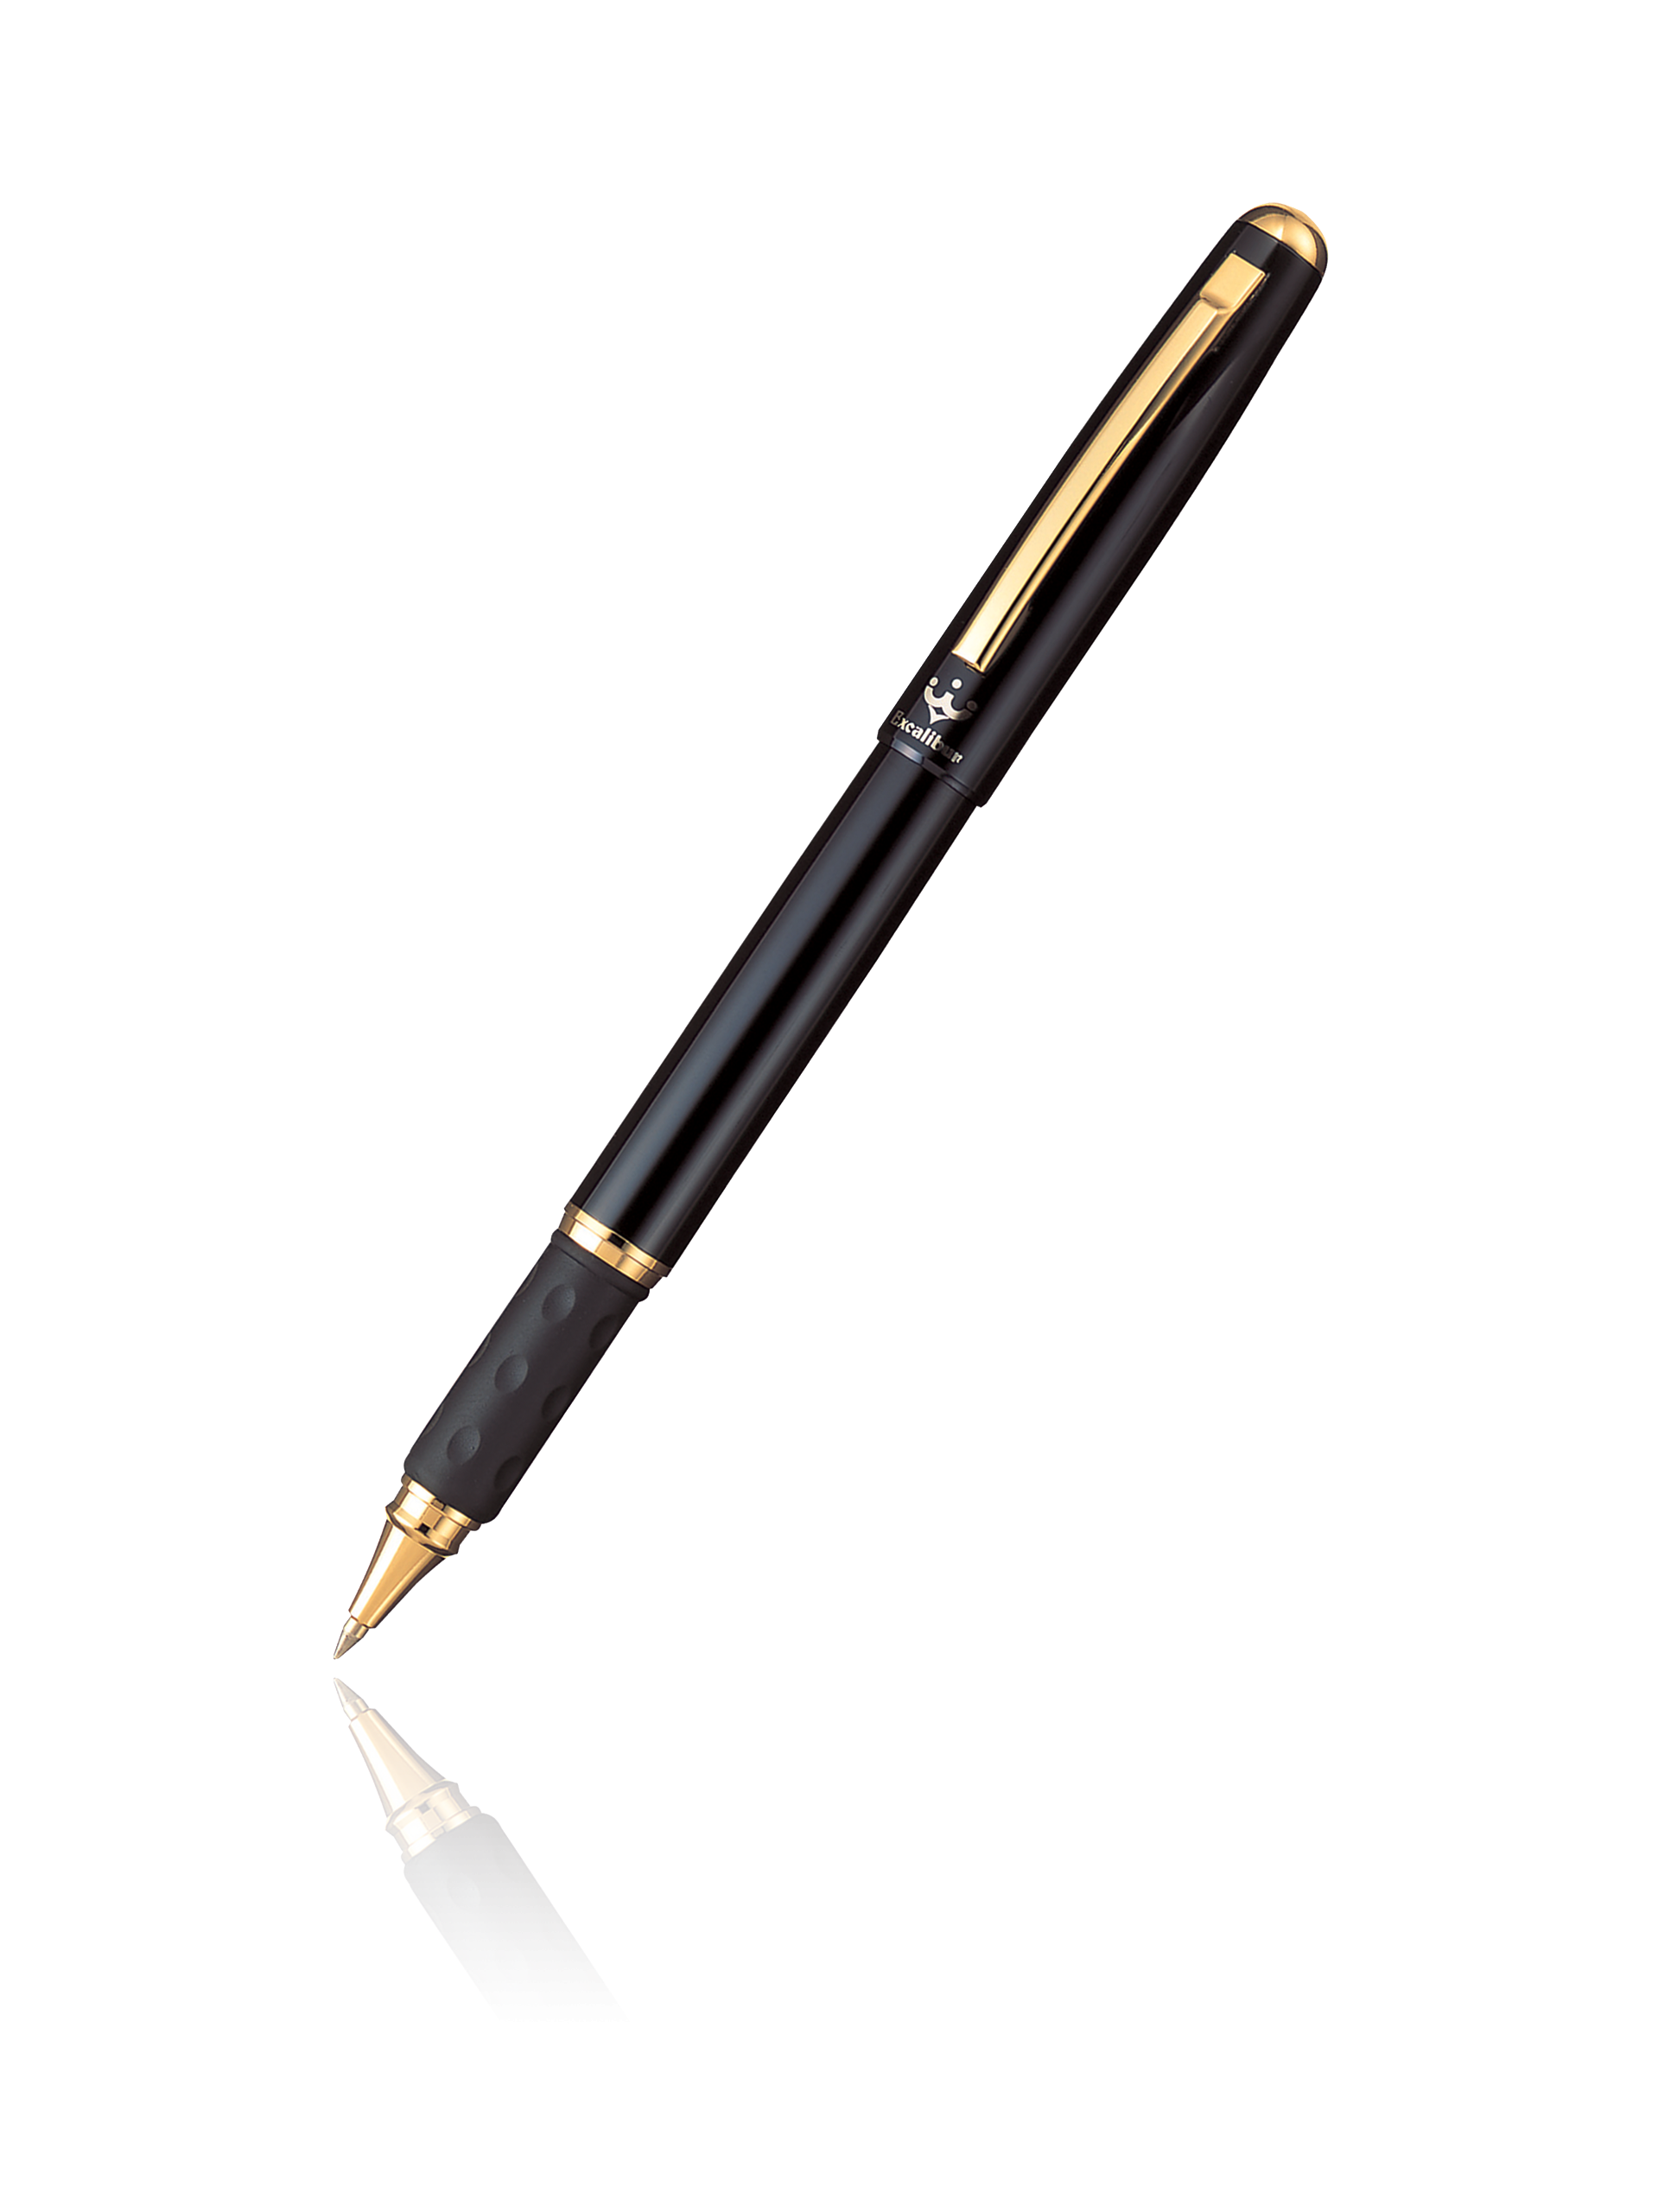 Pen In Hand Png image #43195